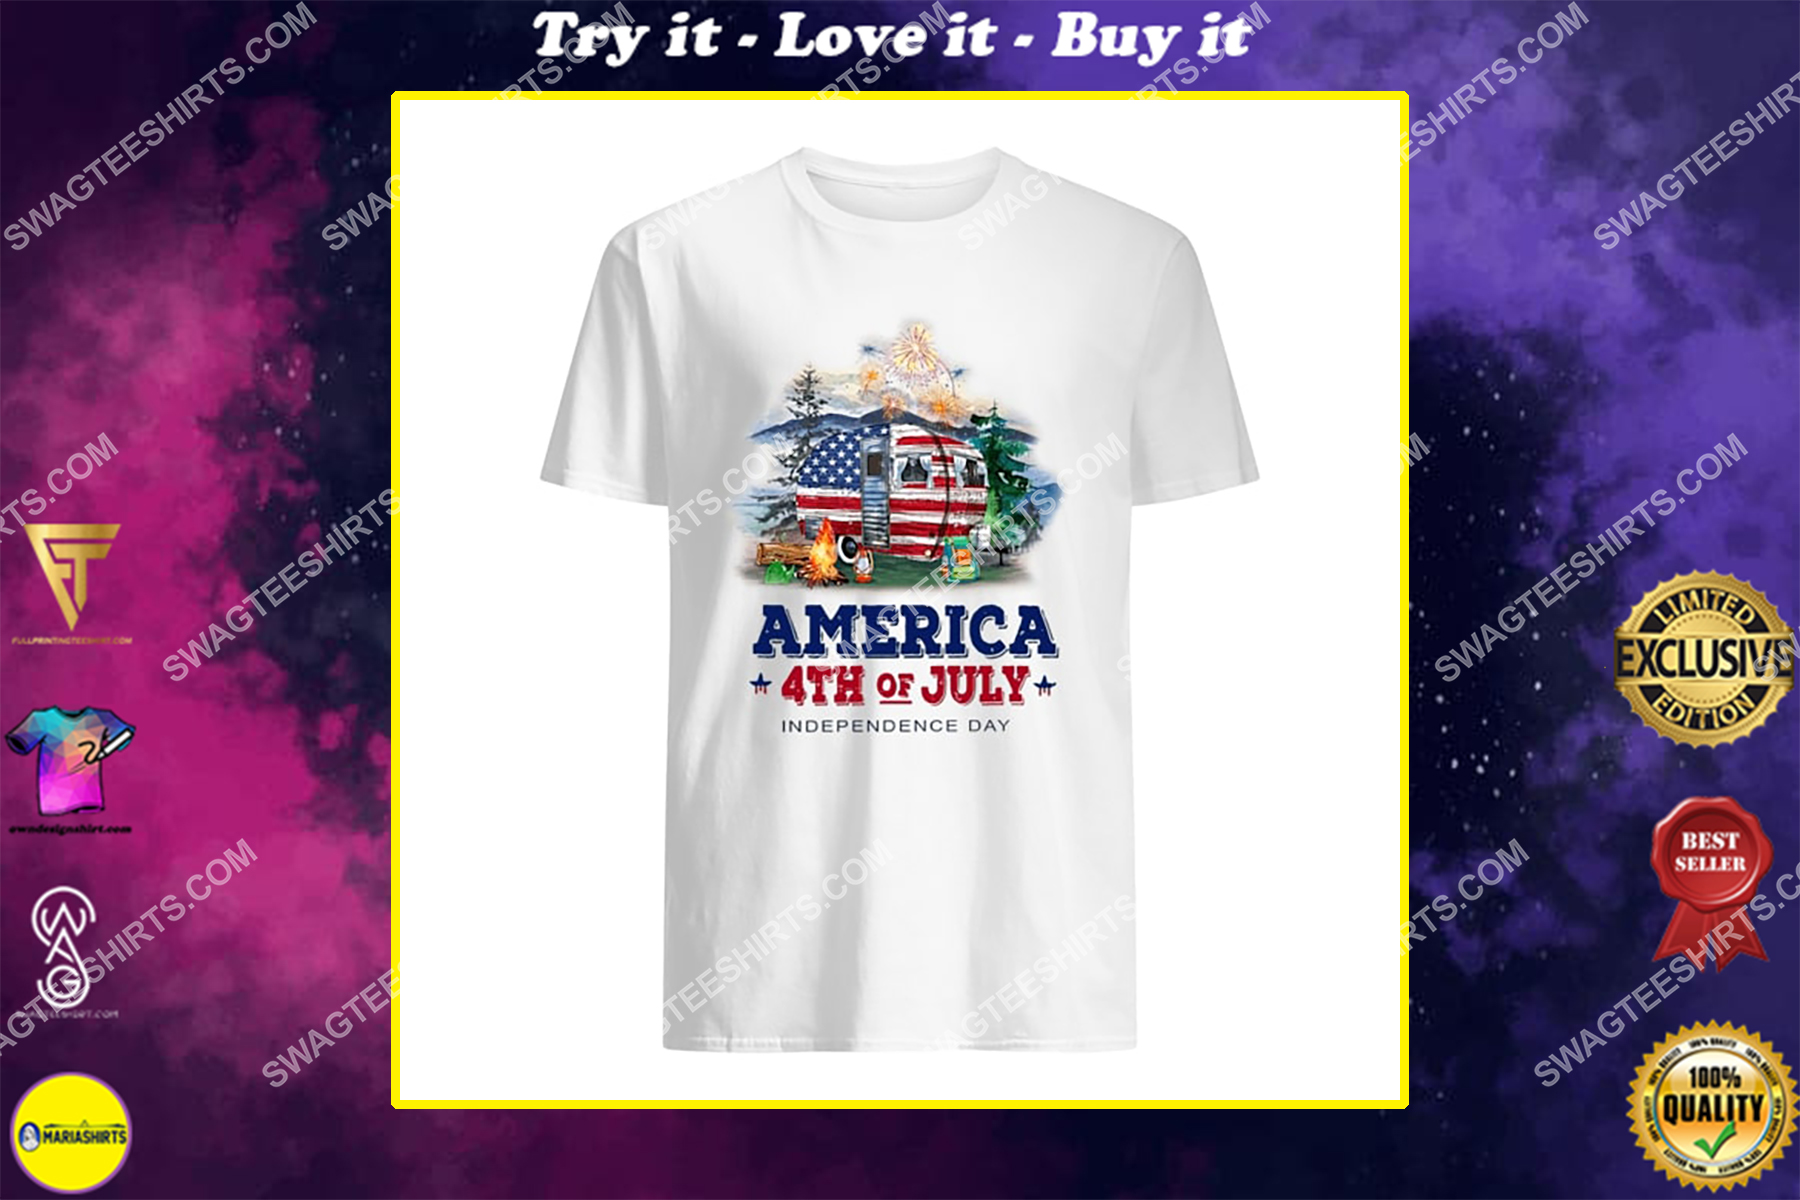 america 4th of july independence day for camping shirt